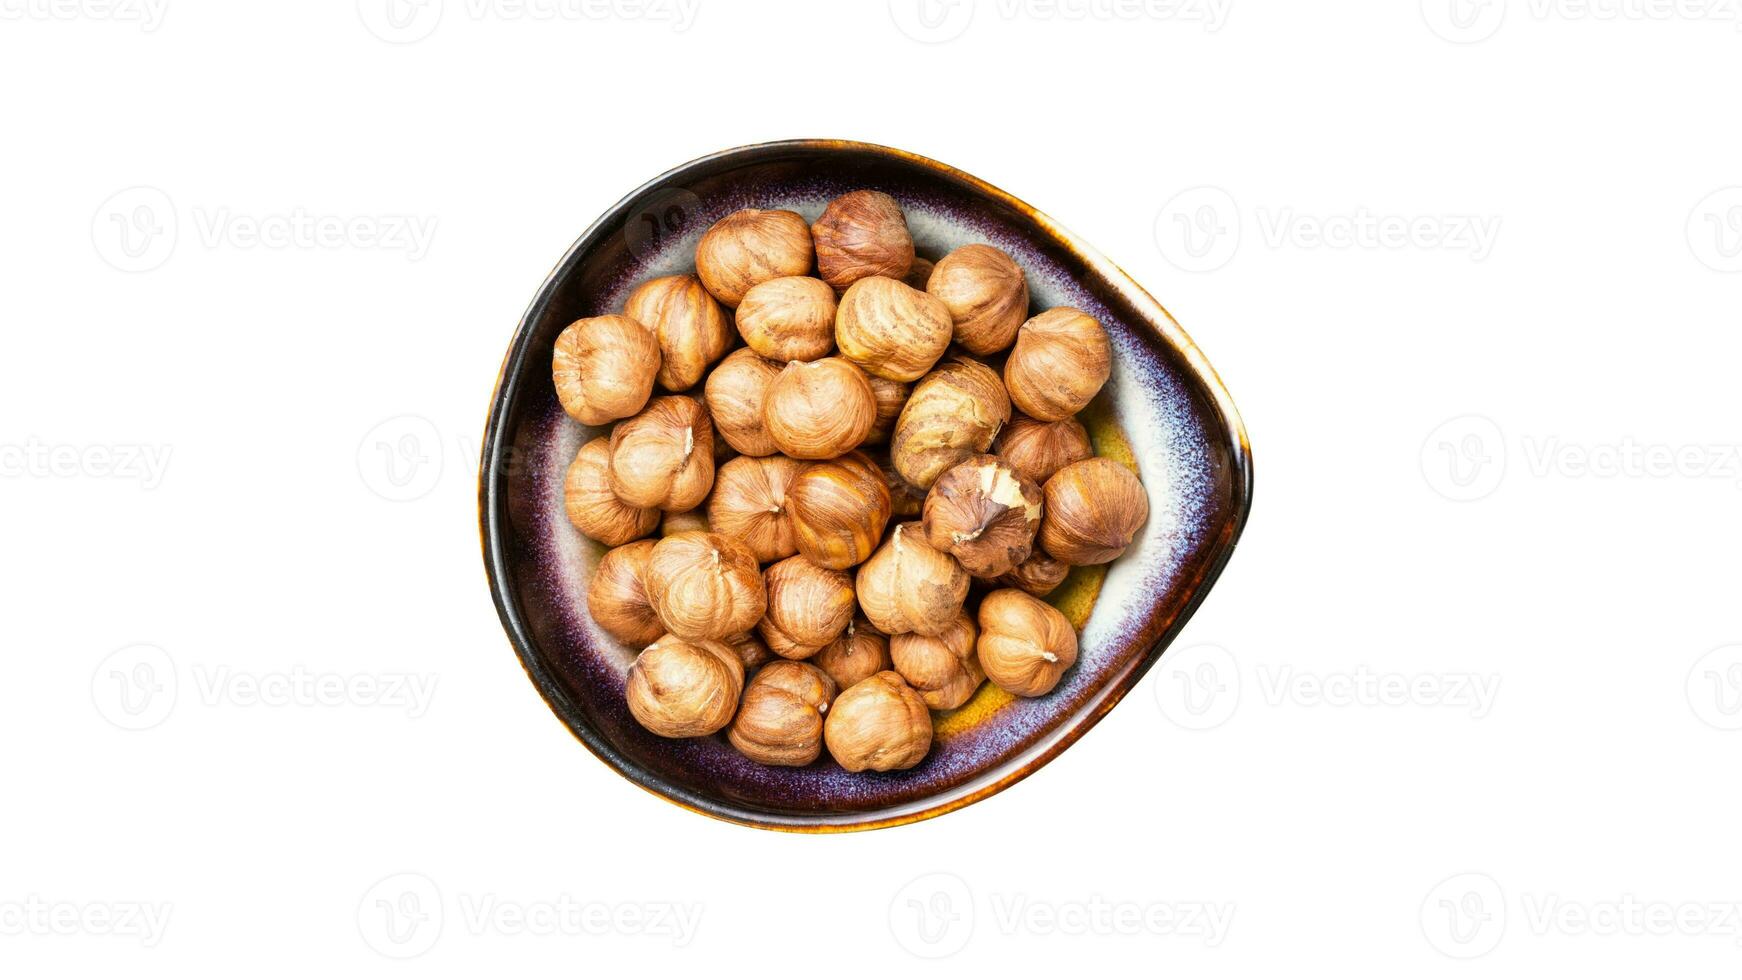 Organic Brown Hazelnuts. Delicious Healthy Nuts, Concept for Design. Gourmet Ingredients for Culinary Creations, Autumn Harvest Snack photo